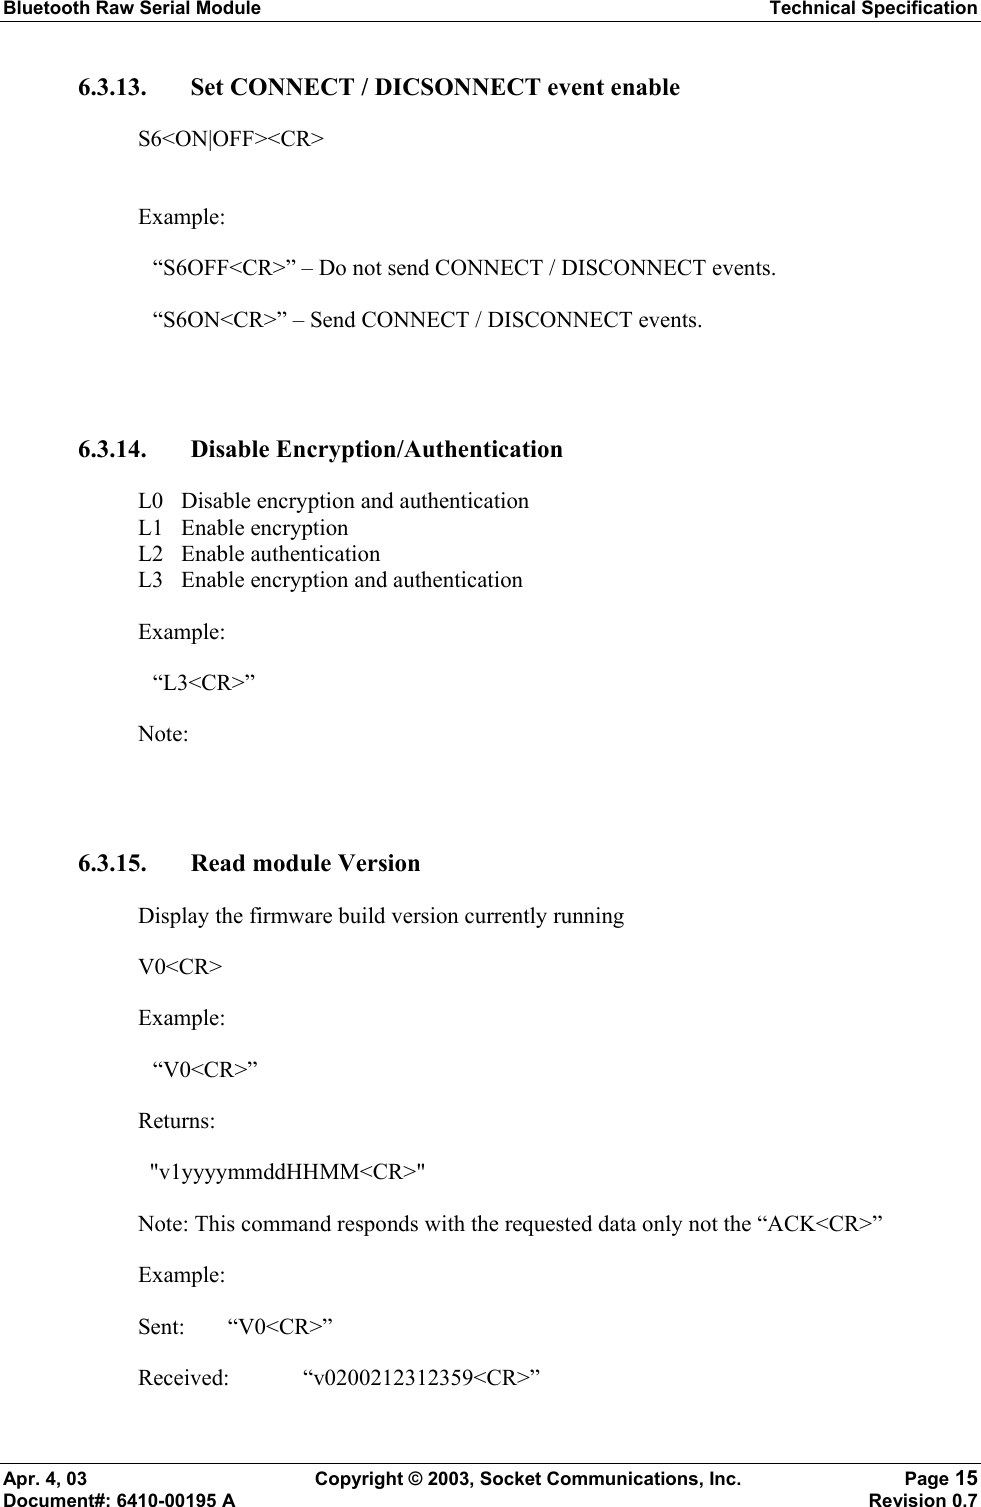 Bluetooth Raw Serial Module Technical Specification Apr. 4, 03  Copyright © 2003, Socket Communications, Inc.  Page 15 Document#: 6410-00195 A    Revision 0.7 6.3.13. Set CONNECT / DICSONNECT event enable S6&lt;ON|OFF&gt;&lt;CR&gt;  Example:   “S6OFF&lt;CR&gt;” – Do not send CONNECT / DISCONNECT events.   “S6ON&lt;CR&gt;” – Send CONNECT / DISCONNECT events.  6.3.14. Disable Encryption/Authentication  L0  Disable encryption and authentication L1 Enable encryption L2 Enable authentication L3  Enable encryption and authentication Example:  “L3&lt;CR&gt;” Note:   6.3.15. Read module Version Display the firmware build version currently running V0&lt;CR&gt; Example:  “V0&lt;CR&gt;” Returns:   &quot;v1yyyymmddHHMM&lt;CR&gt;&quot; Note: This command responds with the requested data only not the “ACK&lt;CR&gt;” Example: Sent: “V0&lt;CR&gt;” Received:   “v0200212312359&lt;CR&gt;” 